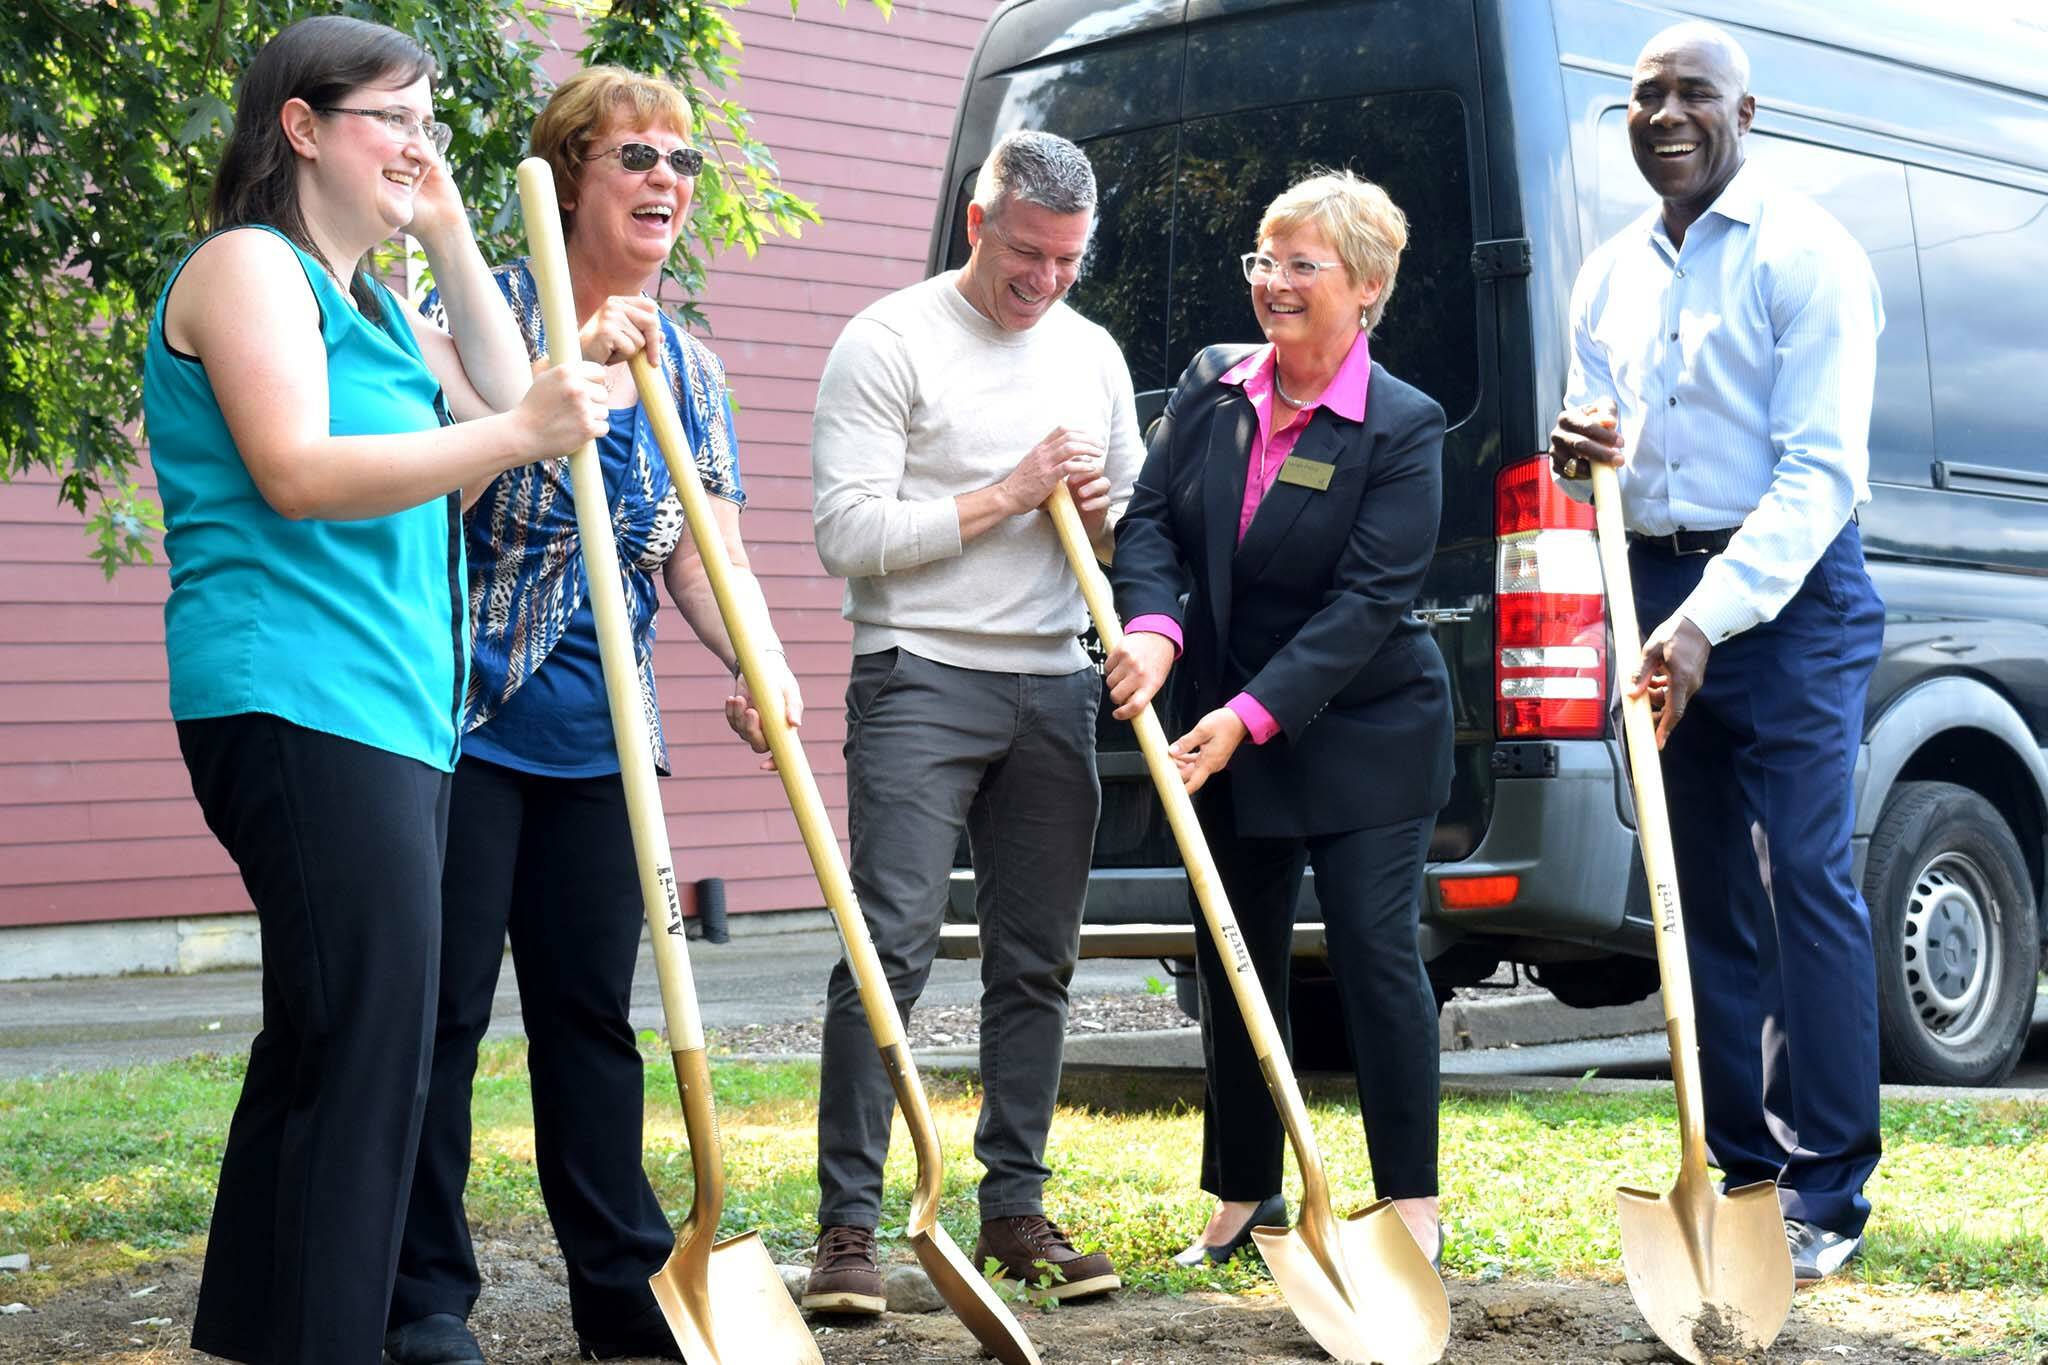 Sno-Valley Senior Center staffers and elected-officials celebrate the groundbreaking of new affordable senior apartments in Carnation on Aug. 23. From left: Center Executive Director Kira Avery, Director Emeritus Lisa Yeager, State Sen. Brad Hawkins, King County Councilmember Sarah Perry, Sound Generations CEO Jim Wigfall. Photo Conor Wilson/Valley Record.